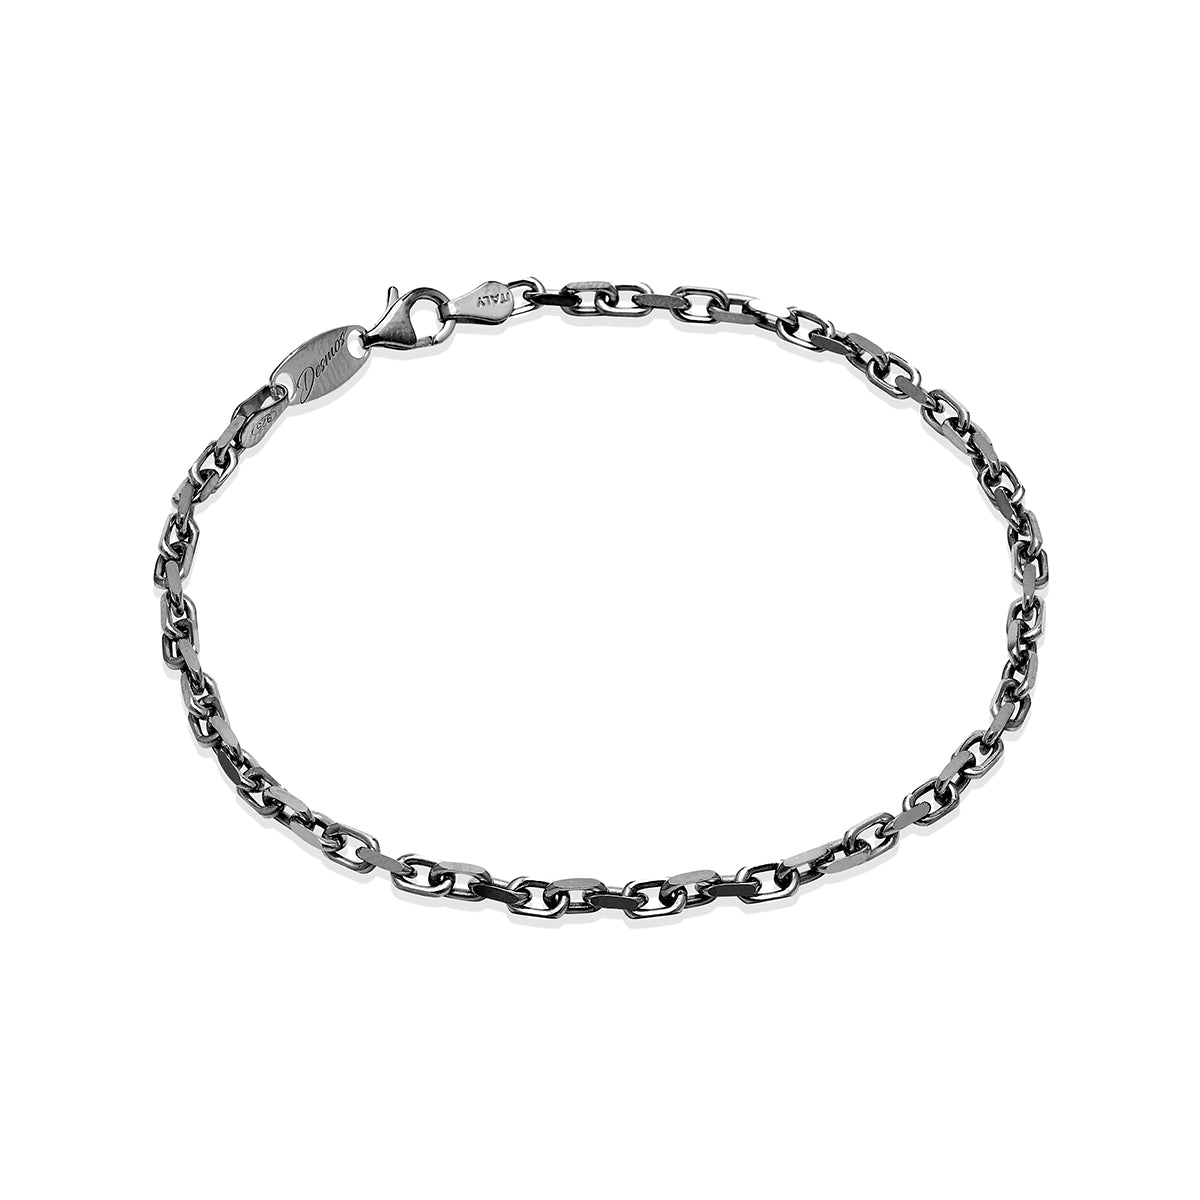 This stylish bracelet is perfect for accessorizing any outfit. The Desmos Italian collection features an open link bracelet, secured with a lobster clasp. An eye-catching piece of jewelry, the Mens Gunmetal Bracelet is an ideal choice for the modern man.